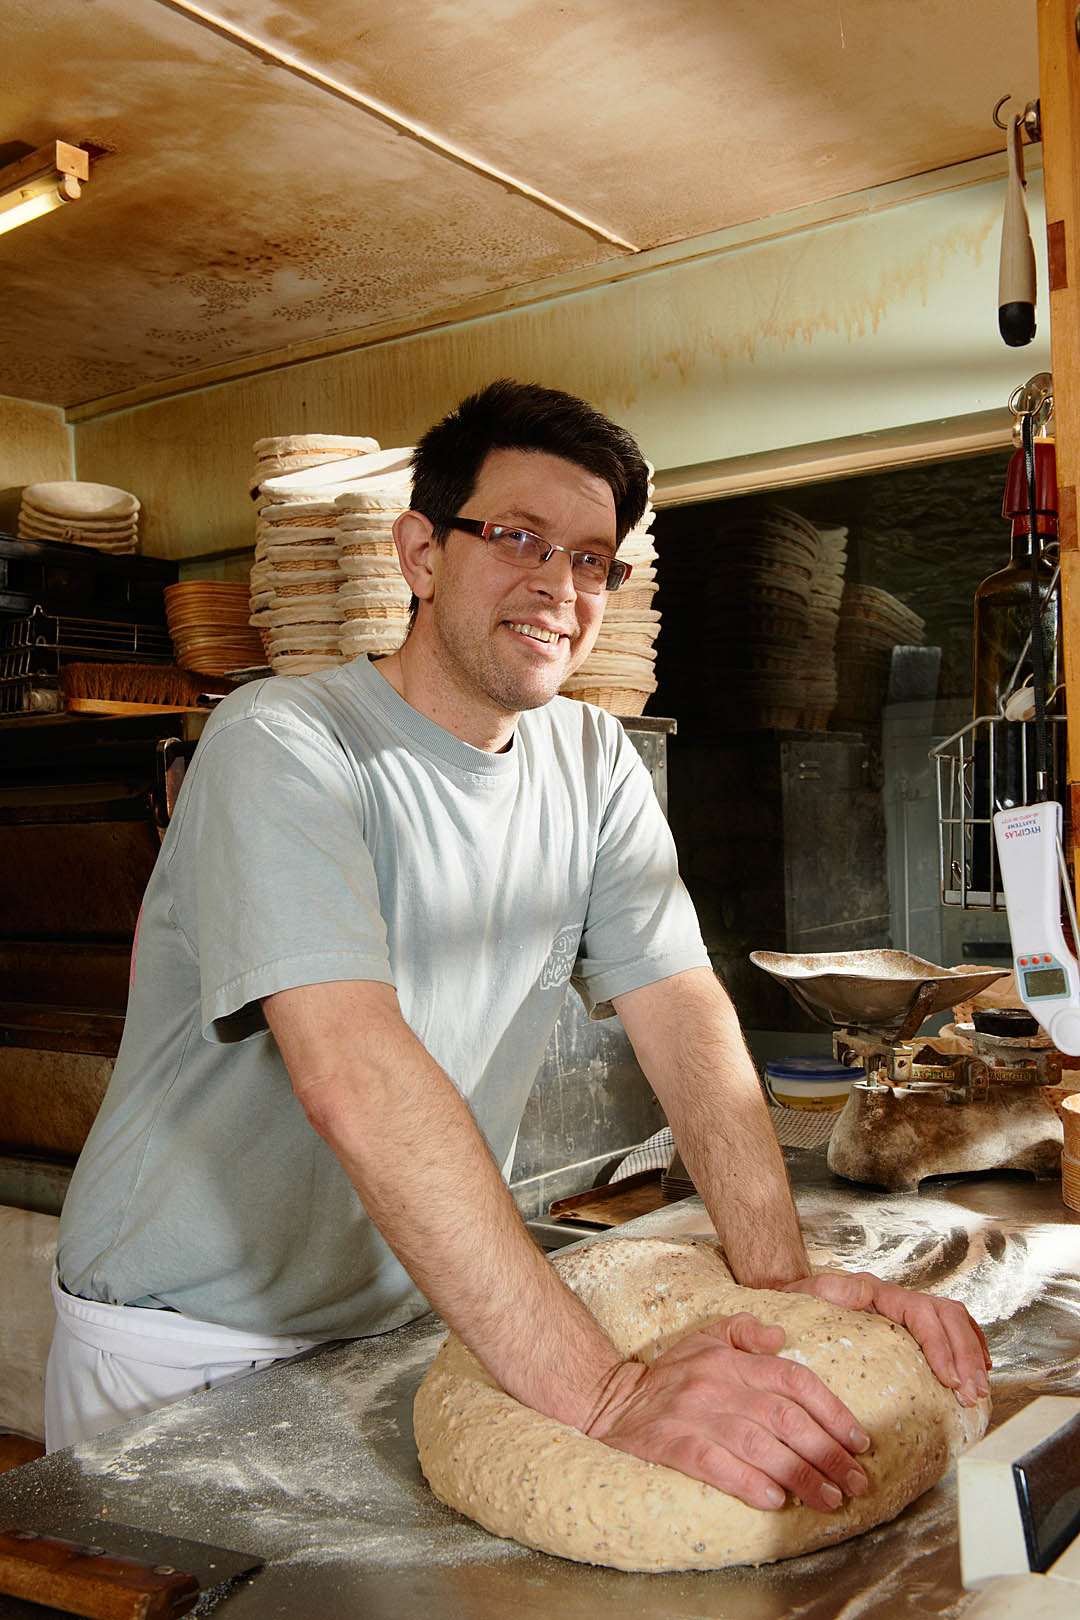 Commercial Photography: Food Production: Artisan Bakery